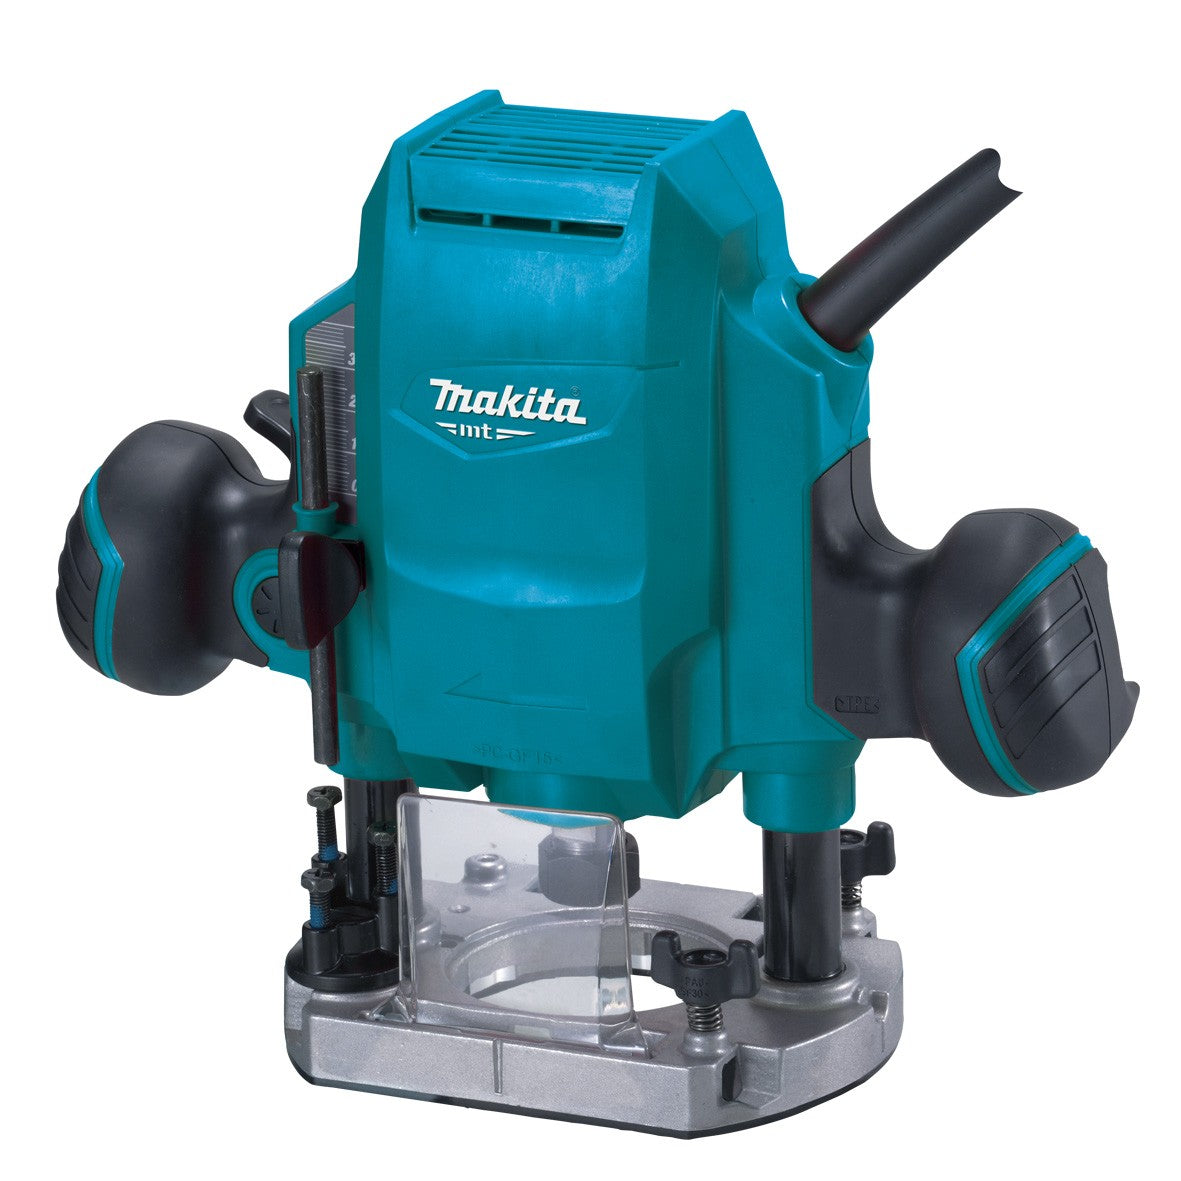 MT Series 8mm (5/16") Plunge Router M3601B by Makita